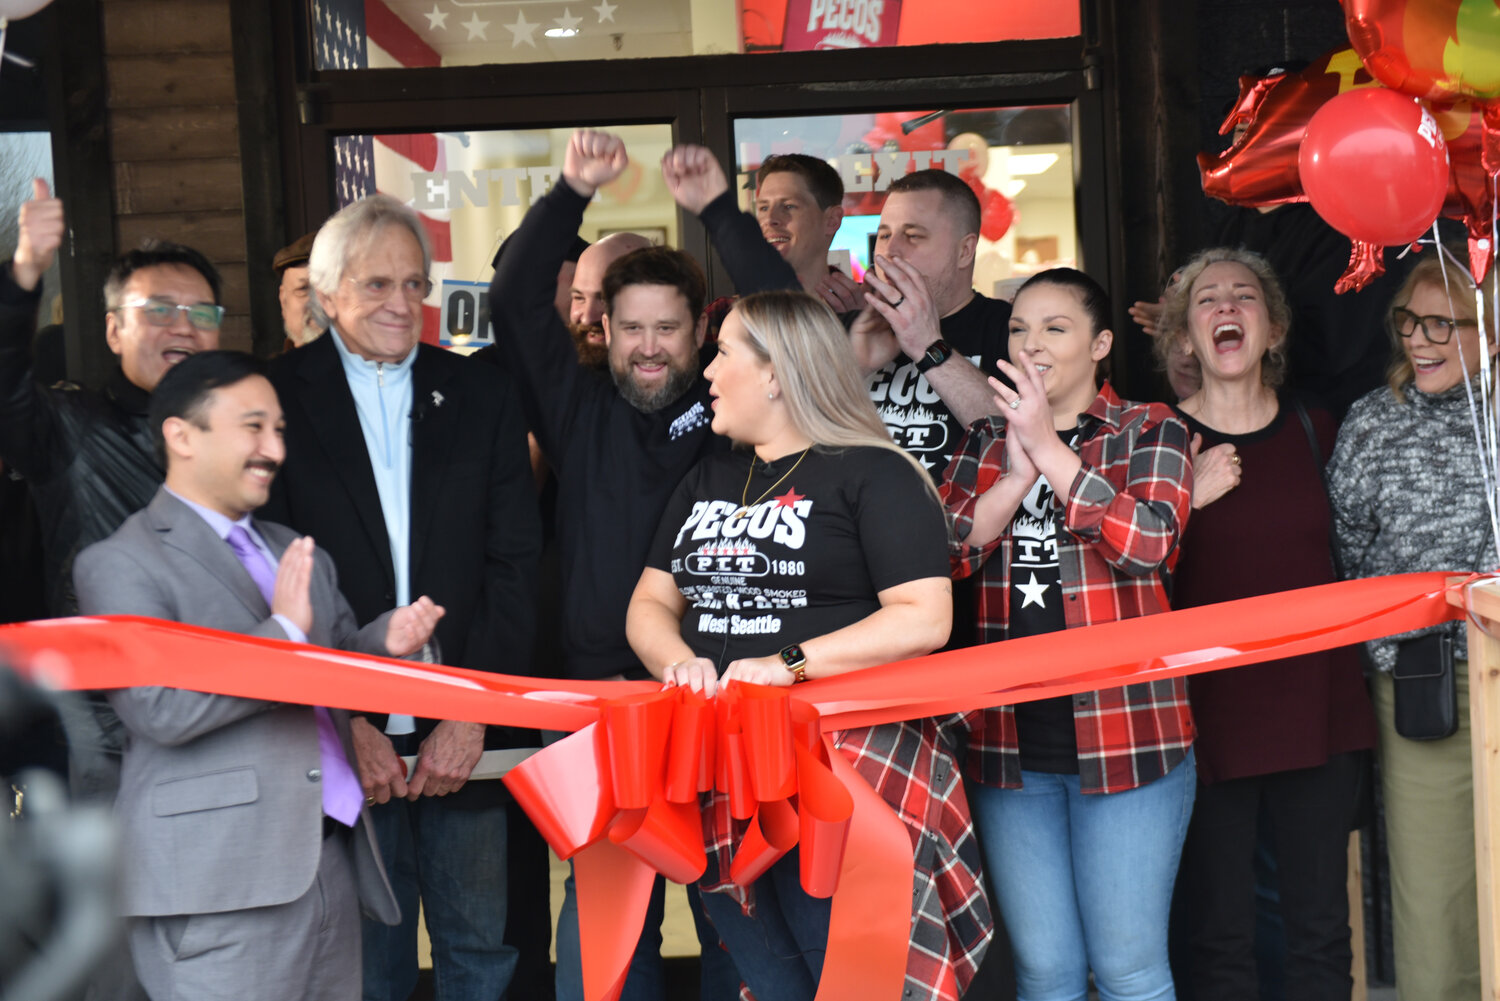 Attendants at Pecos Pit Bar-B-Que's grand opening in Yelm cheer and celebrate after opening remarks from owner Gerry Kingen on Friday, Jan. 26.